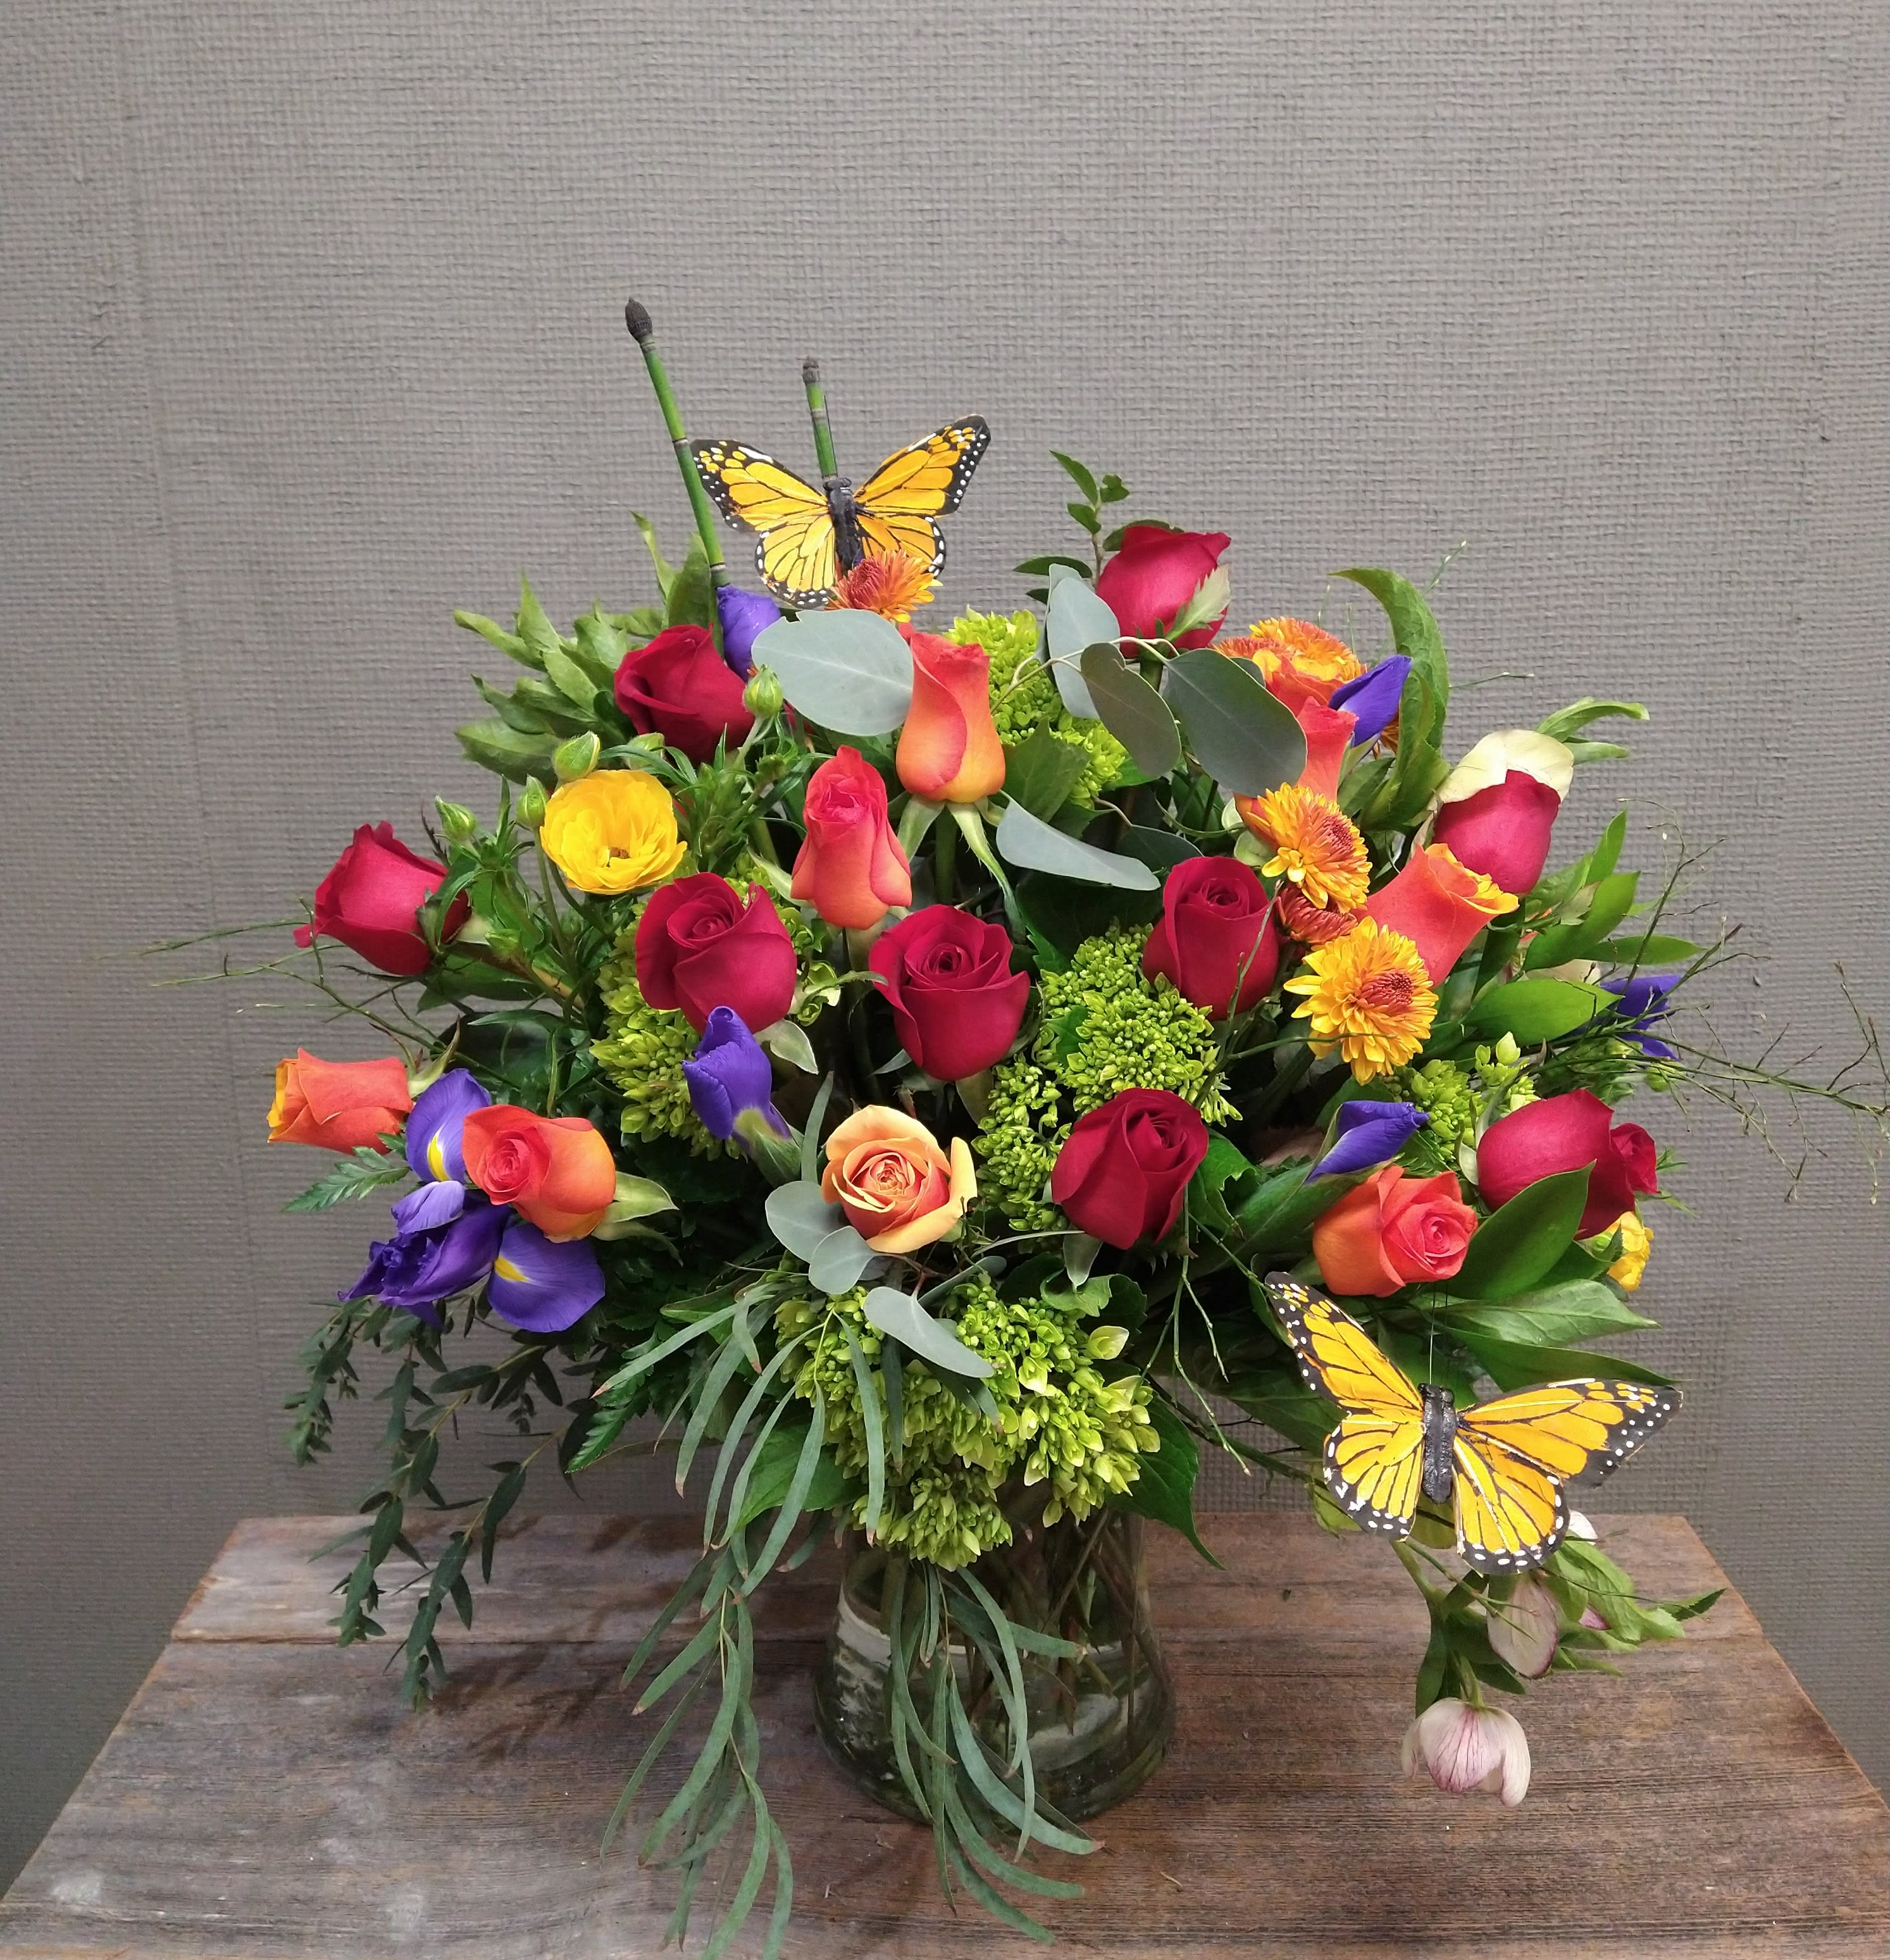 Now and Always - For the enduring love. A statement arrangement with two dozen roses in red and orange, surrounded by blue iris and other seasonally available high-end flowers in jewel tones, such as hydrangea, viburnum, ranunculus, hellebores, dahlia, anenome, etc. We will do our best to accommodate any requests for colors or flowers; please let us know in special instructions.